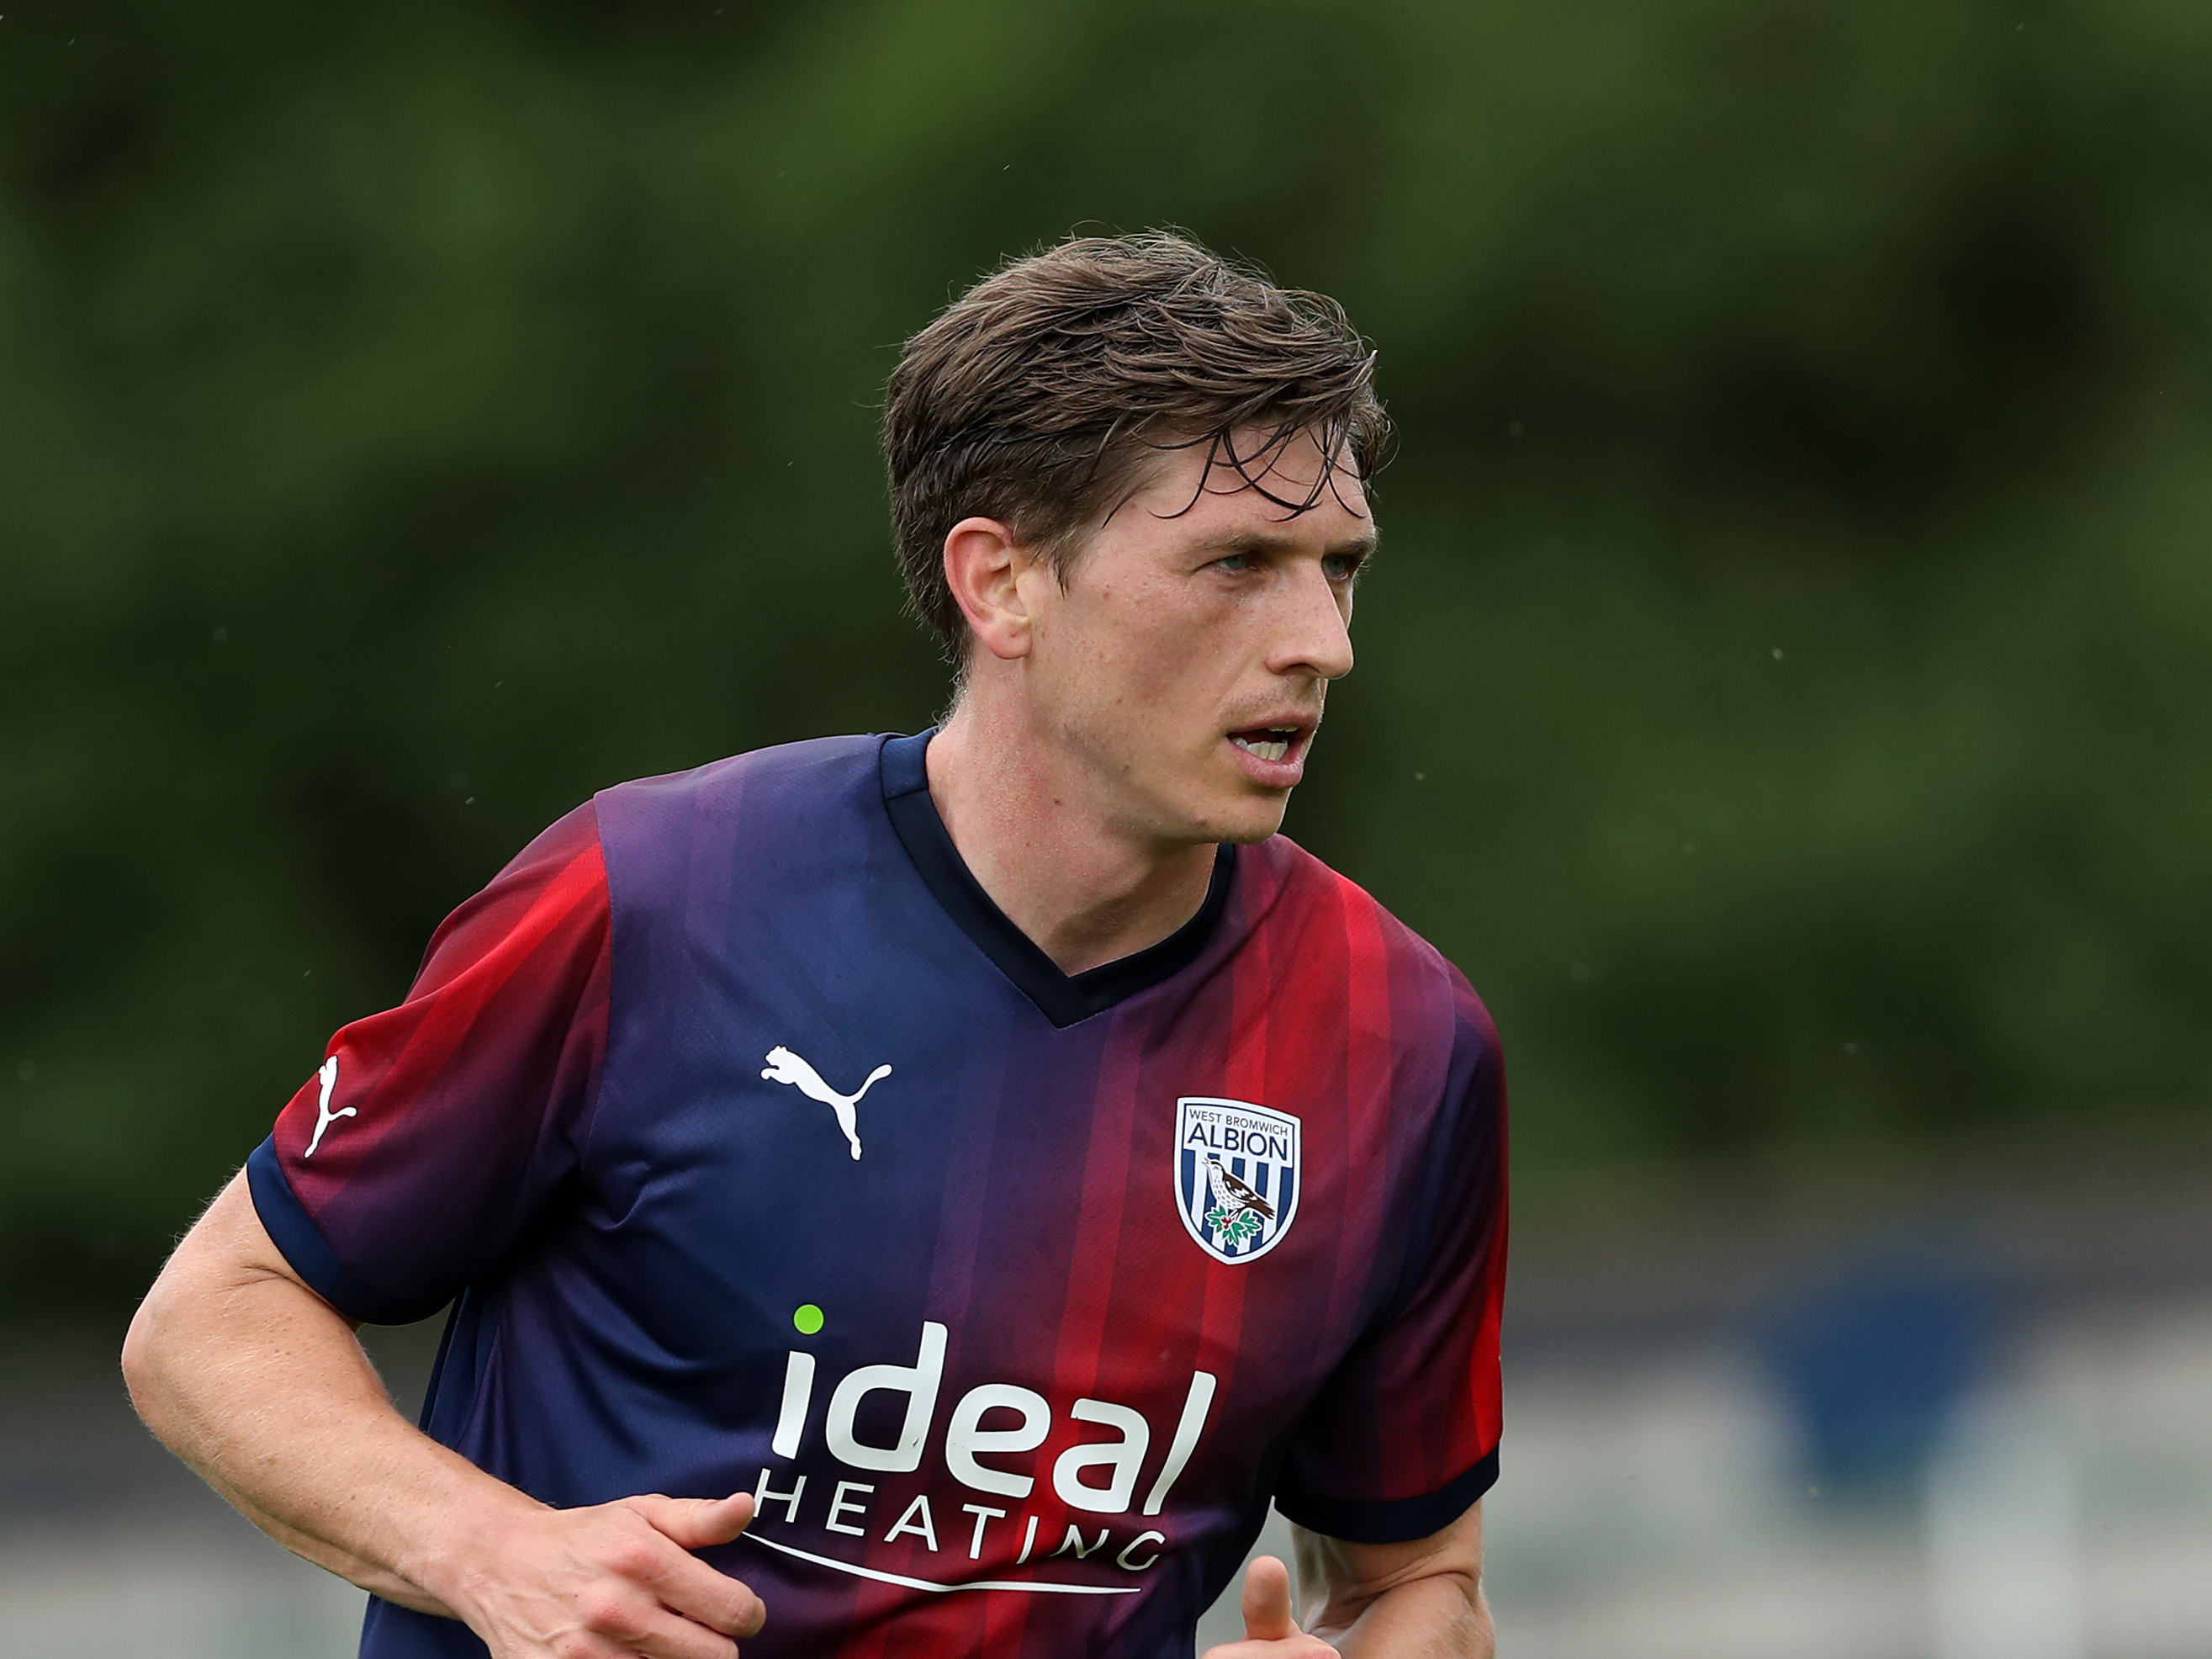 Adam Reach in action wearing the club's navy and red away kit